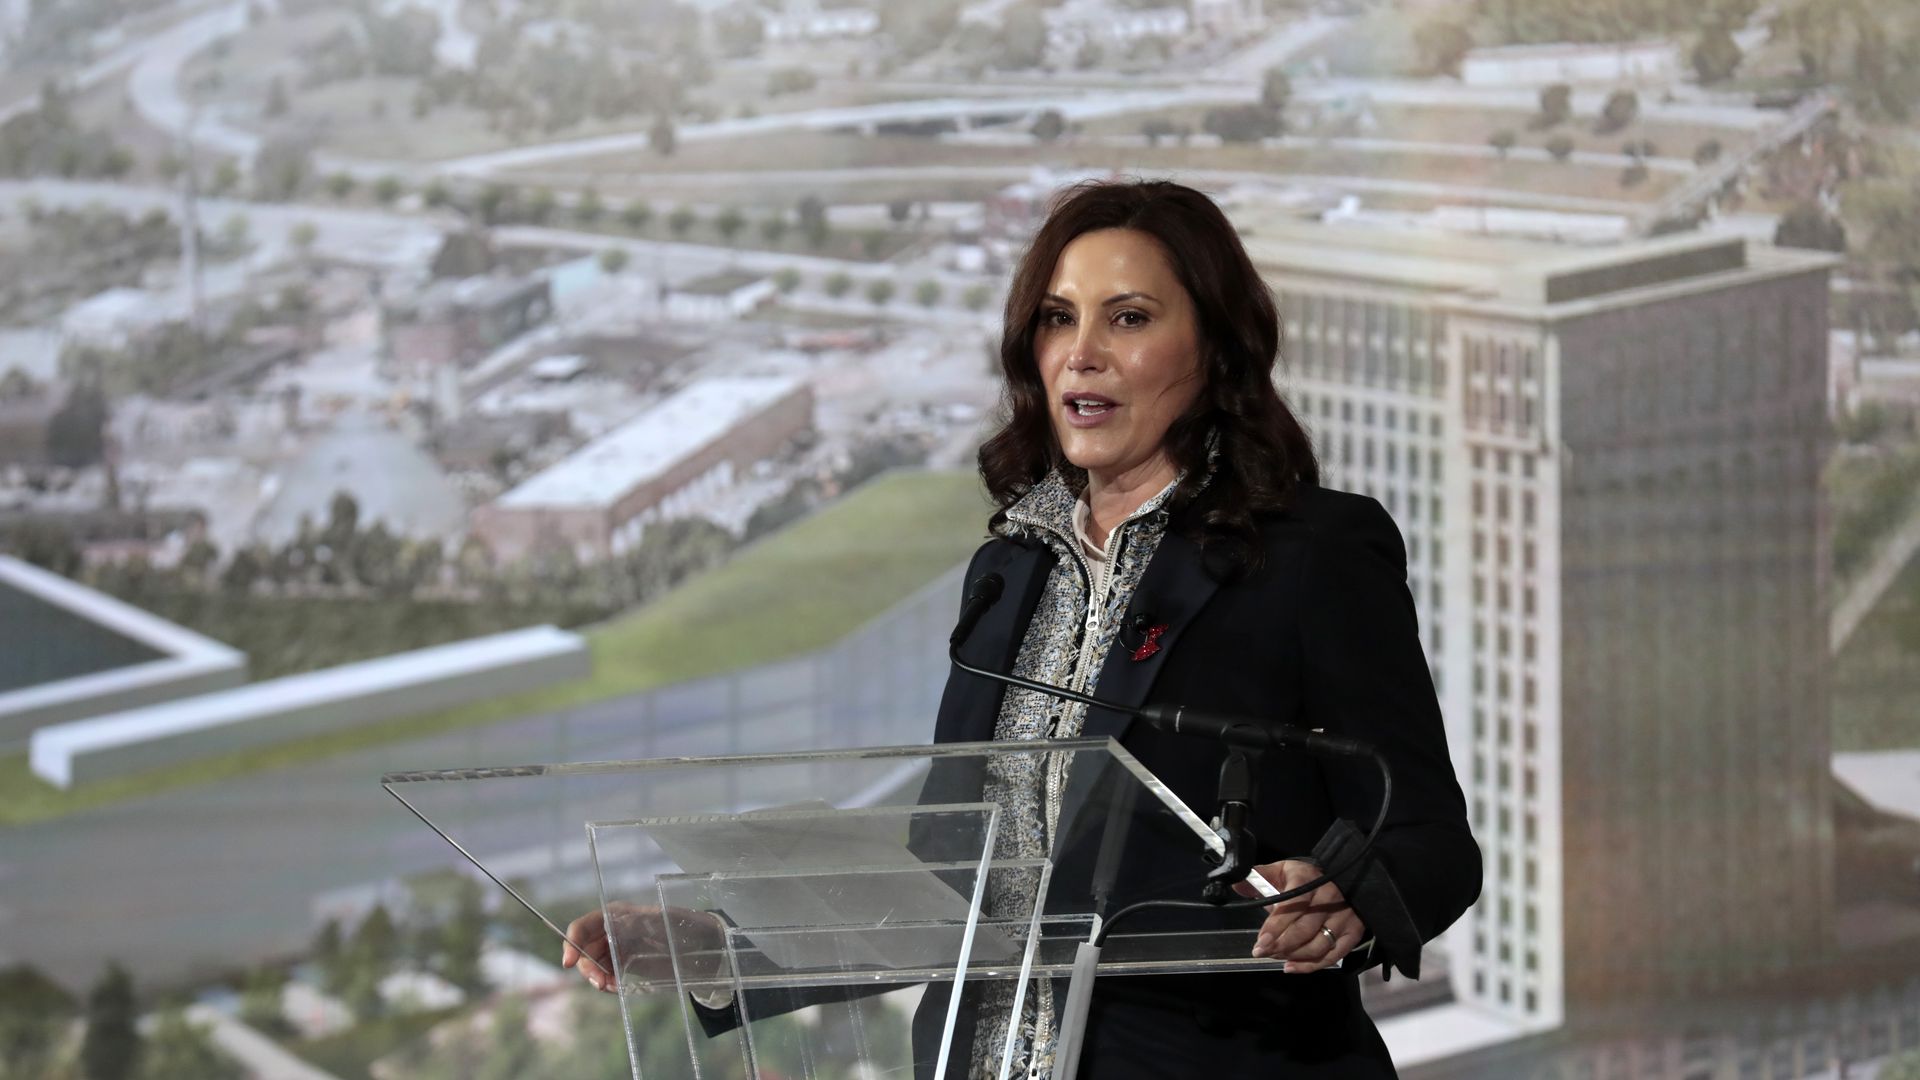 Gretchen Whitmer, governor of Michigan, speaks during a news conference at Michigan Central Station in Detroit, Michigan, U.S., on Friday, Feb. 4, 2022.